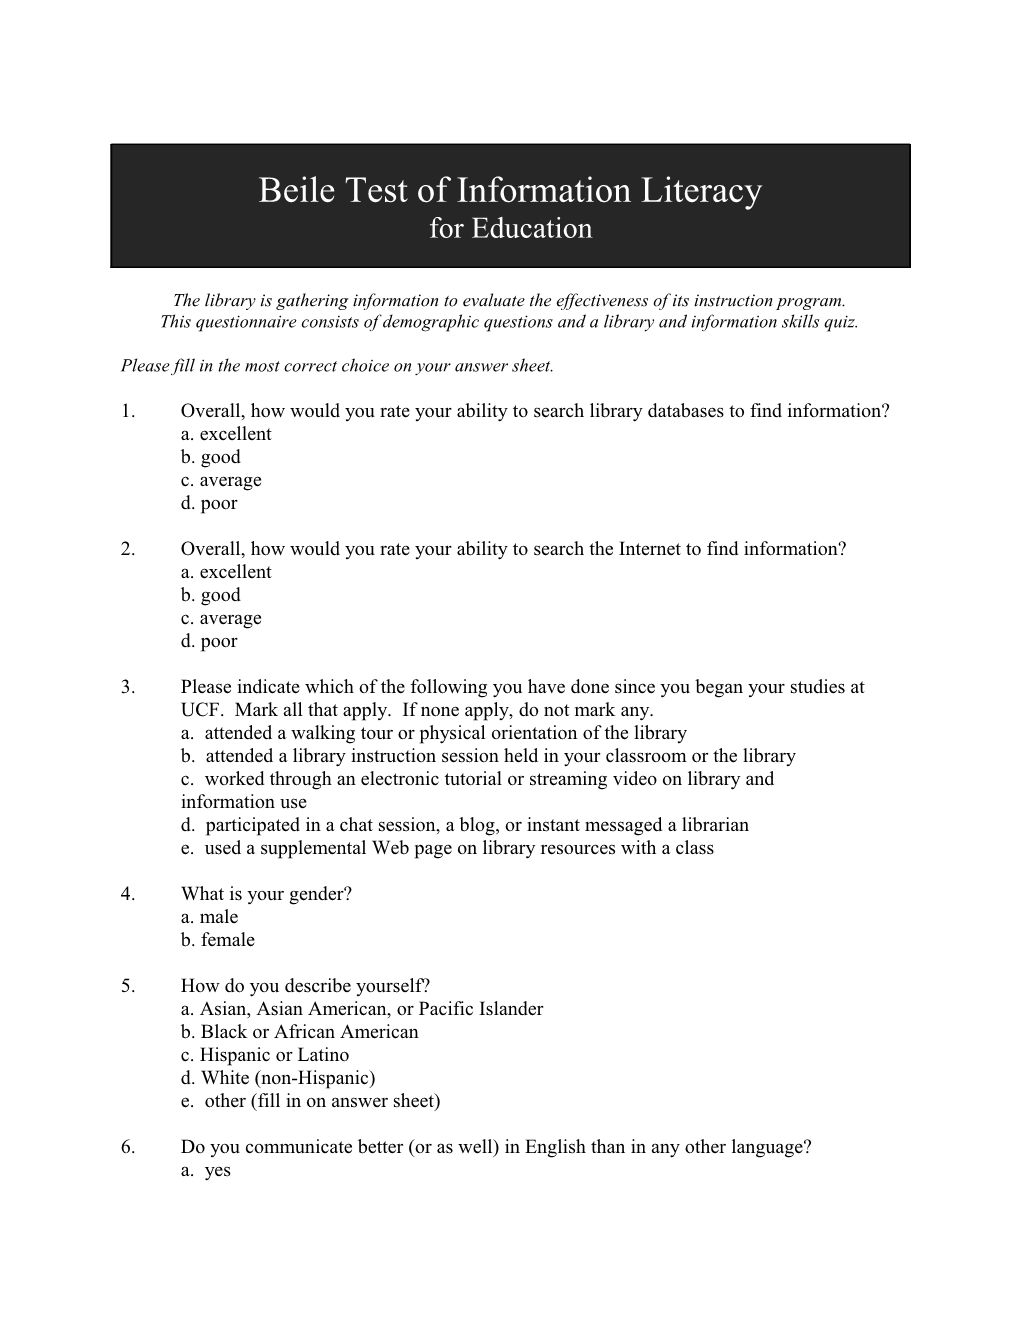 The Library Is Gathering Information to Evaluate the Effectiveness of Its Instruction Program